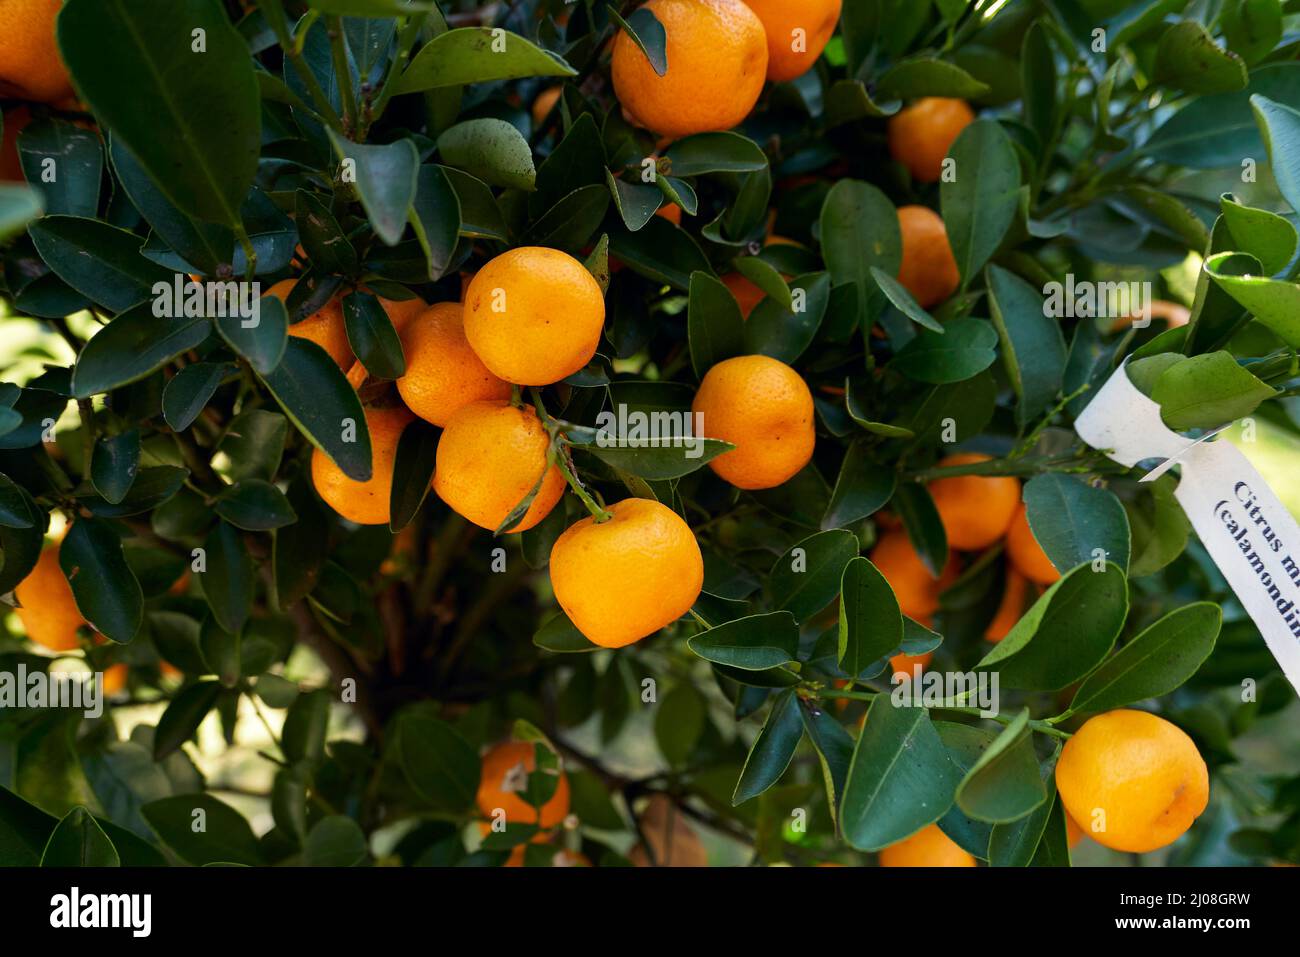 Citrus mitis branch close up with fruits Stock Photo